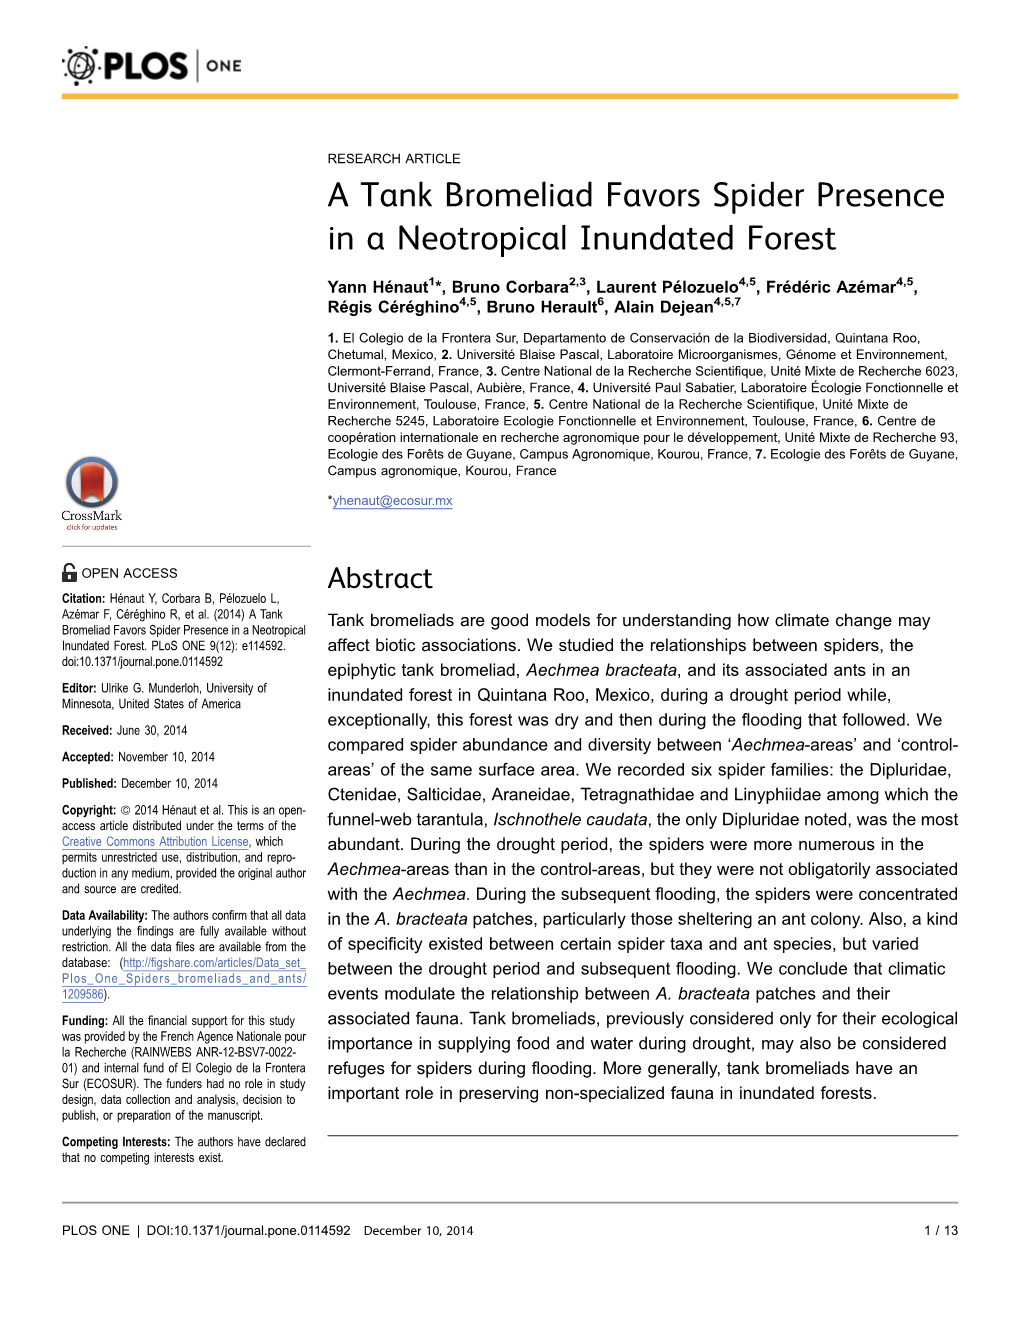 A Tank Bromeliad Favors Spider Presence in a Neotropical Inundated Forest